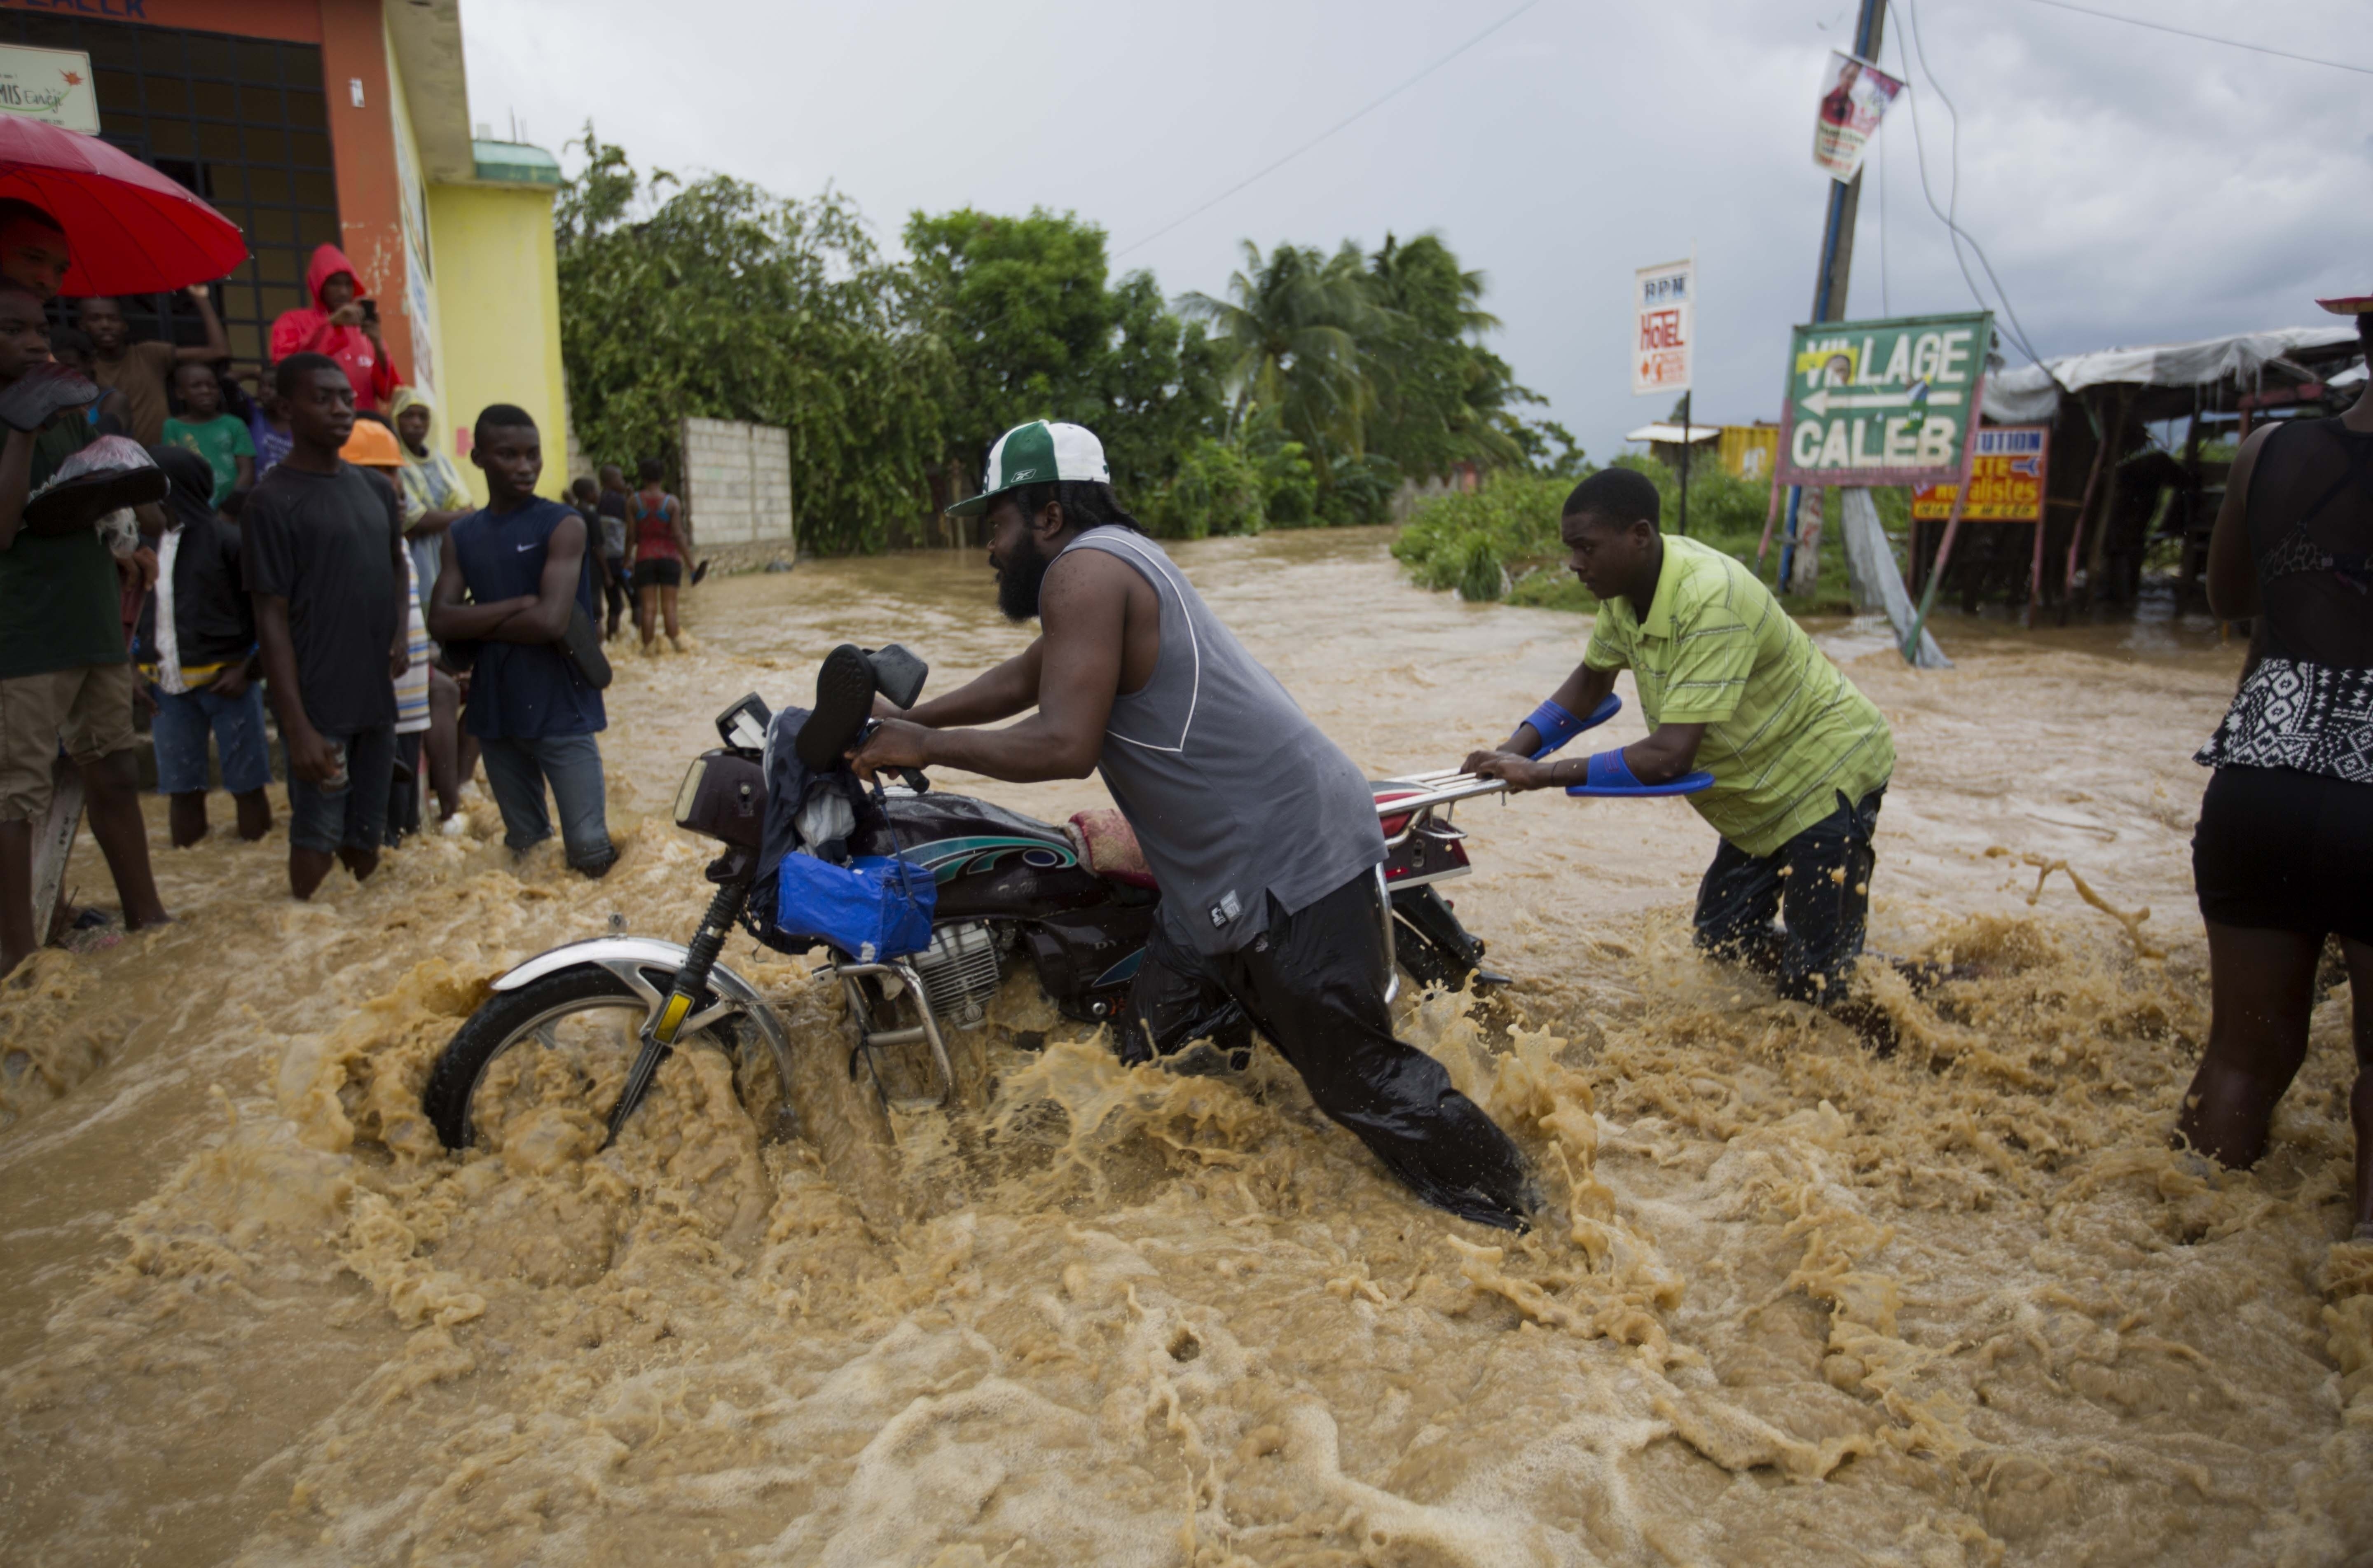 Men push a motorbike through a flooded street in Leogane, Haiti. U.N. peacekeepers already in Haiti spent Wednesday trying to clear local roads around Port-au-Prince. (Photo by Dieu Nalio Chery/Associated Press)